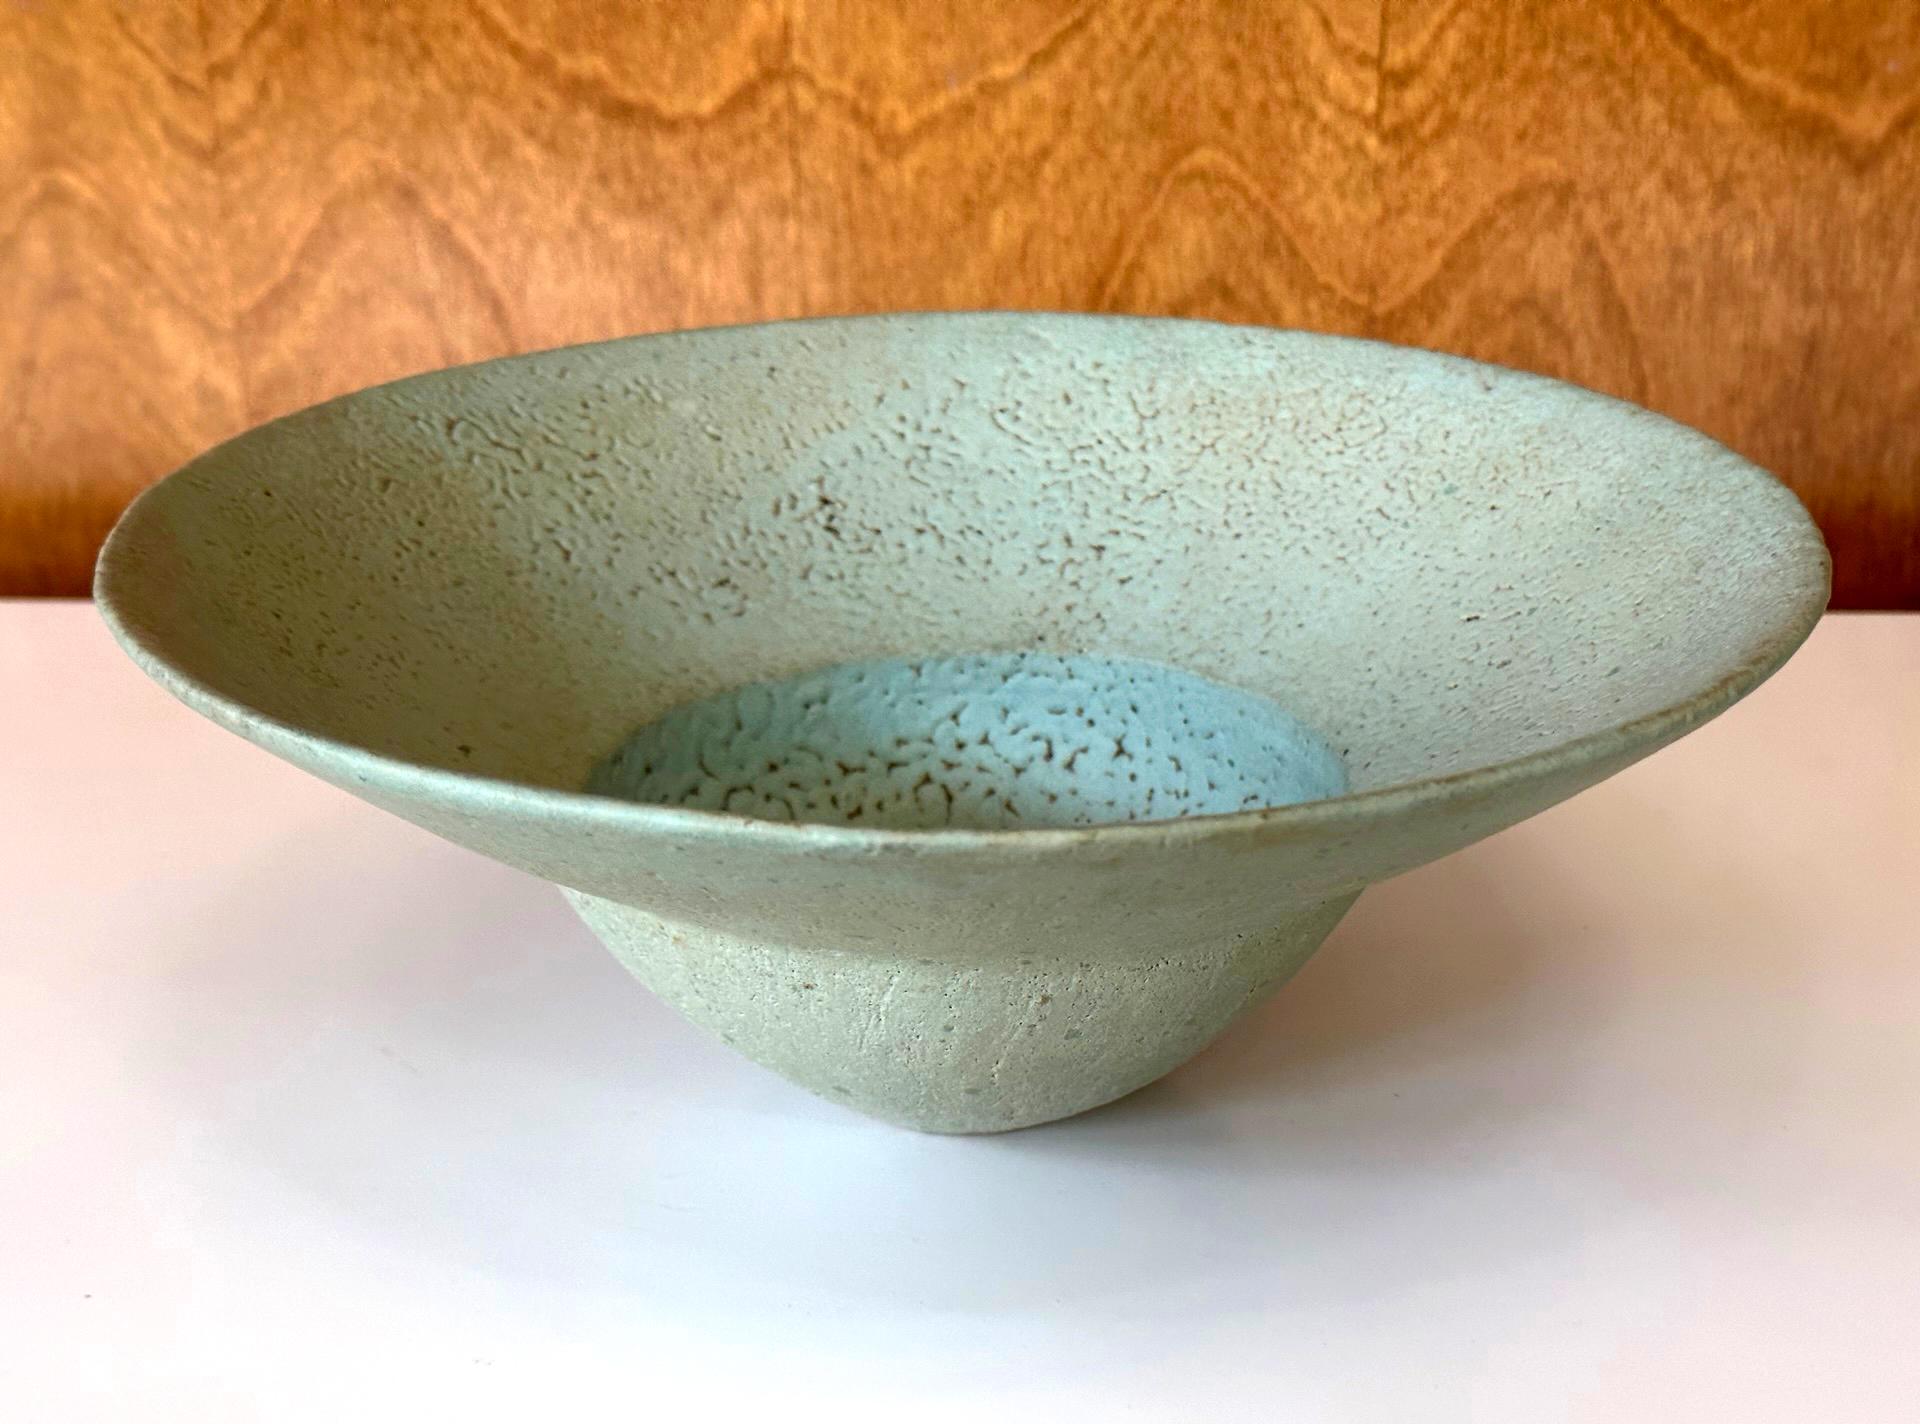 A stoneware glazed bowl by British studio potter John Ward (1938-2023) circa 1980-1990s of the last quarter of the 20th century. The bowl features a distinct form with a wide flanged rim and spherical body. The surface is covered with a copper green